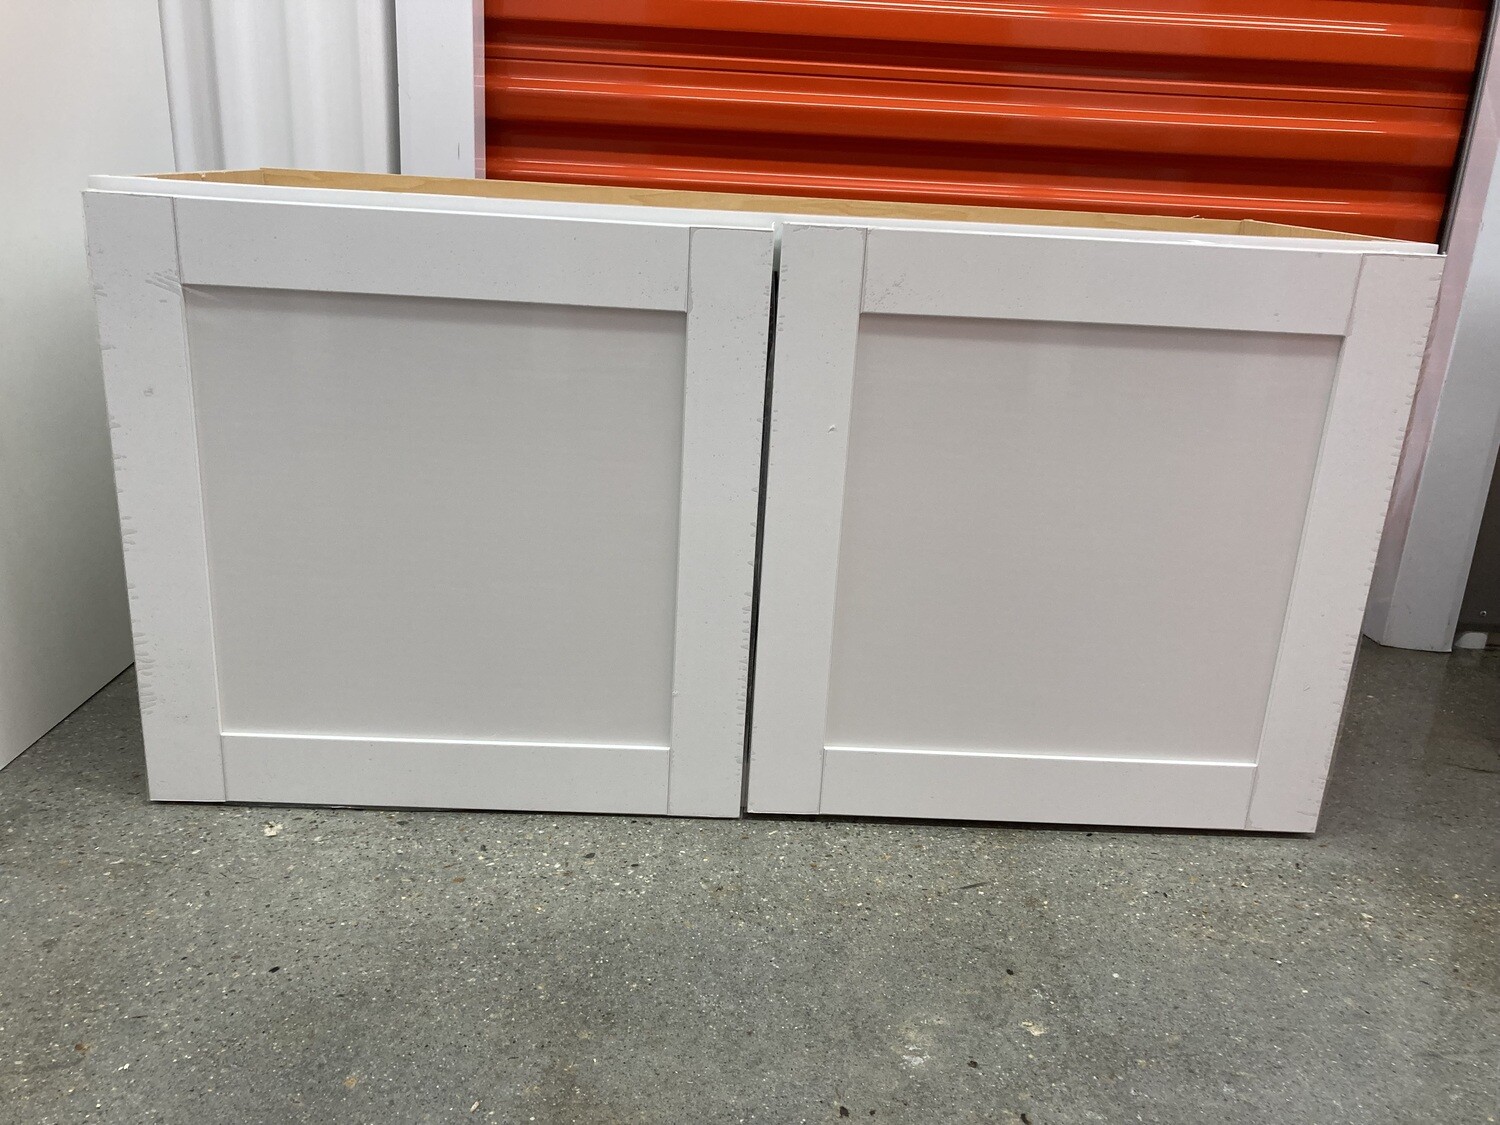 New Wall Cabinet, Arcadia white 35.5x18 #1149